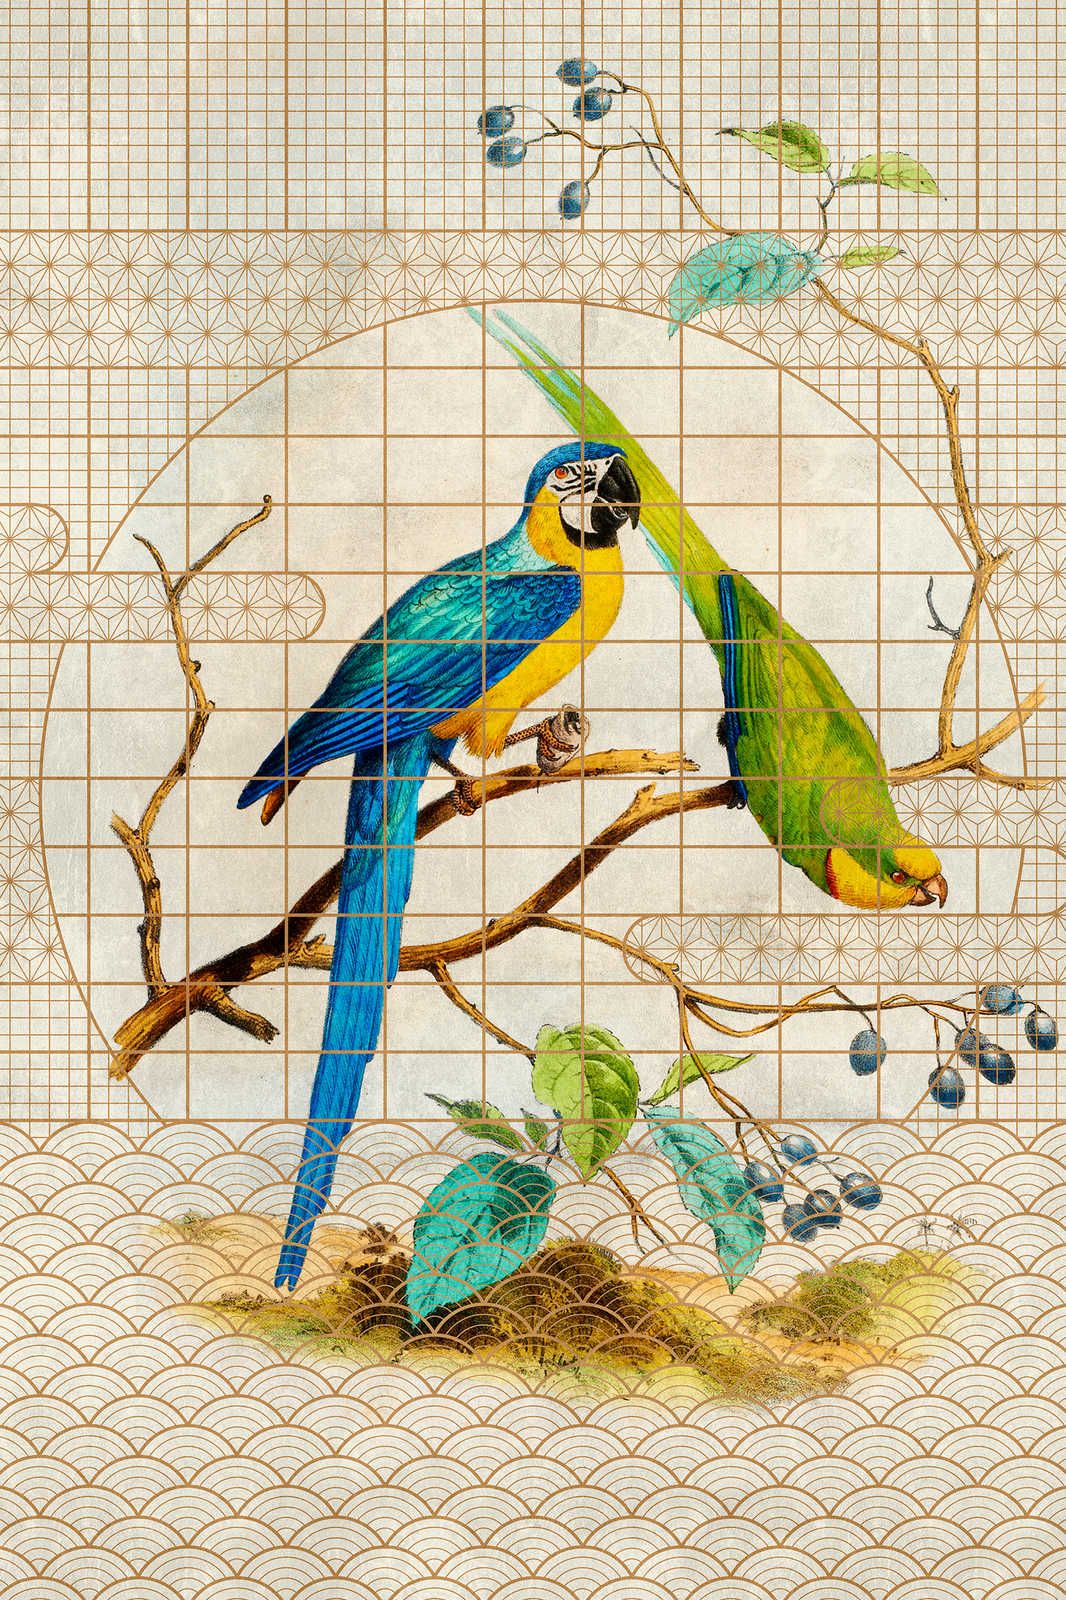             Aviary 3 - Vintage Style Parrot & Golden Pattern Canvas Painting - 0.90 m x 0.60 m
        